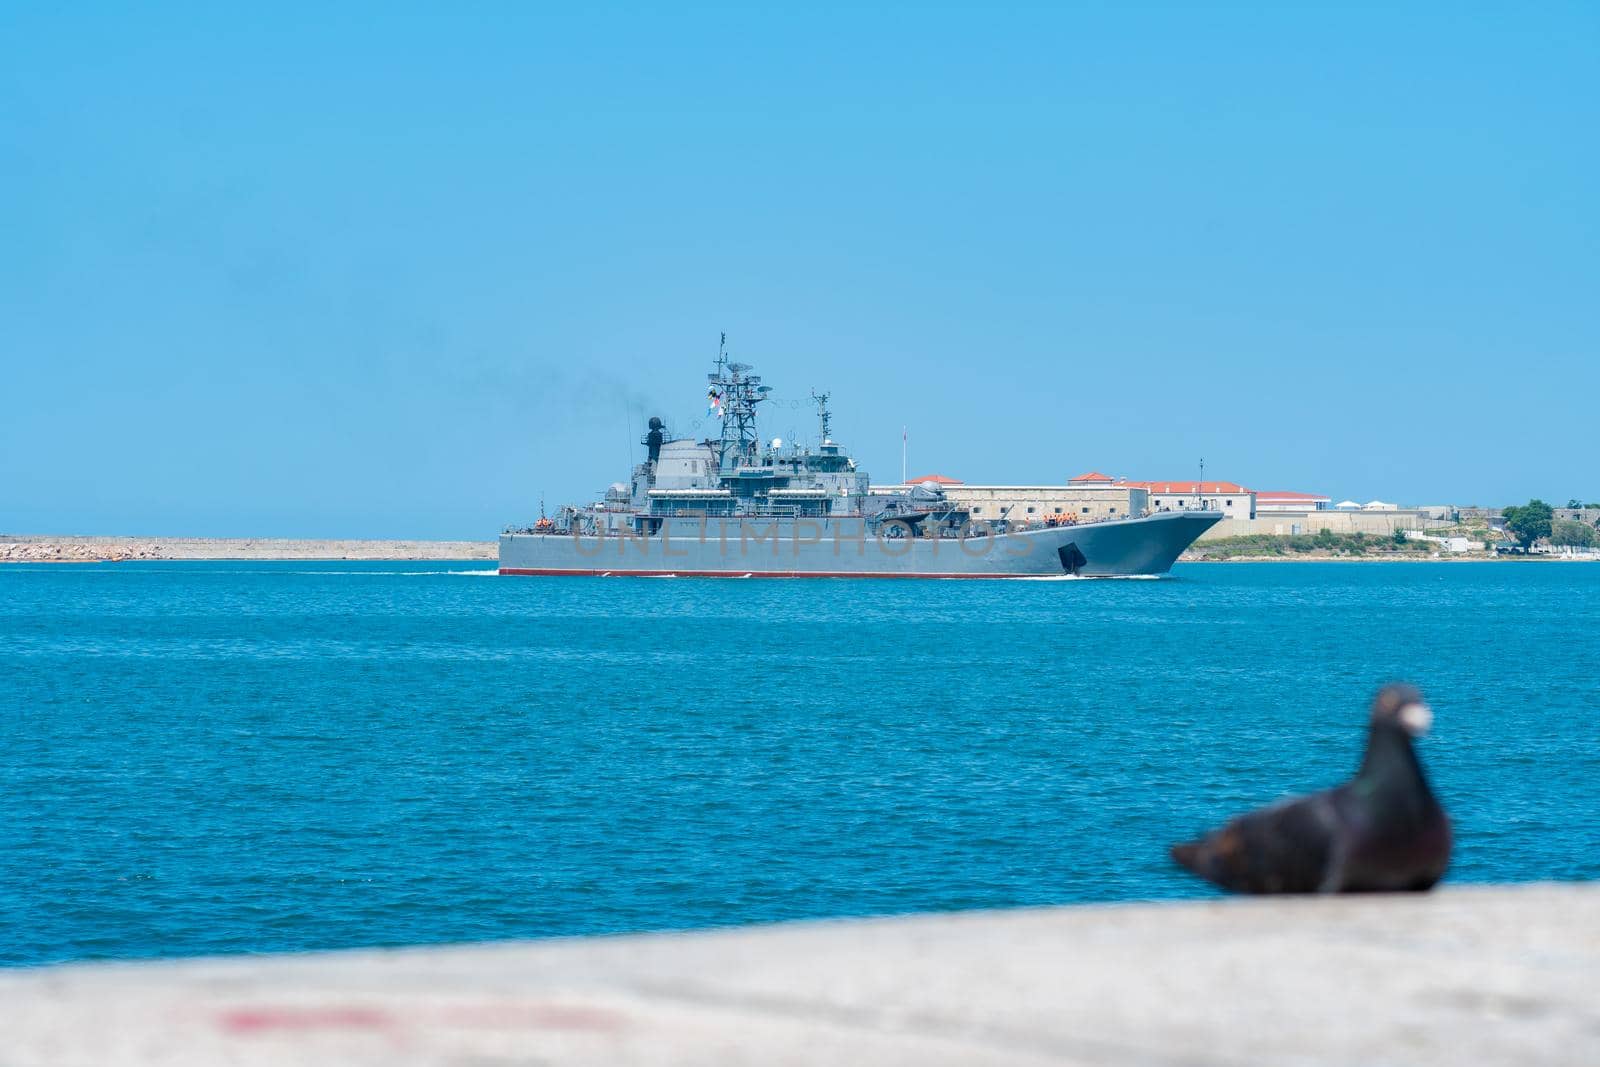 RUSSIA, CRIMEA - JUL 08, 2022: Russian sevastopol military group russia navy day sky parade battleship, for boat crimea in battle and port outdoor, transport nautical. Destroyer gray missile, by 89167702191